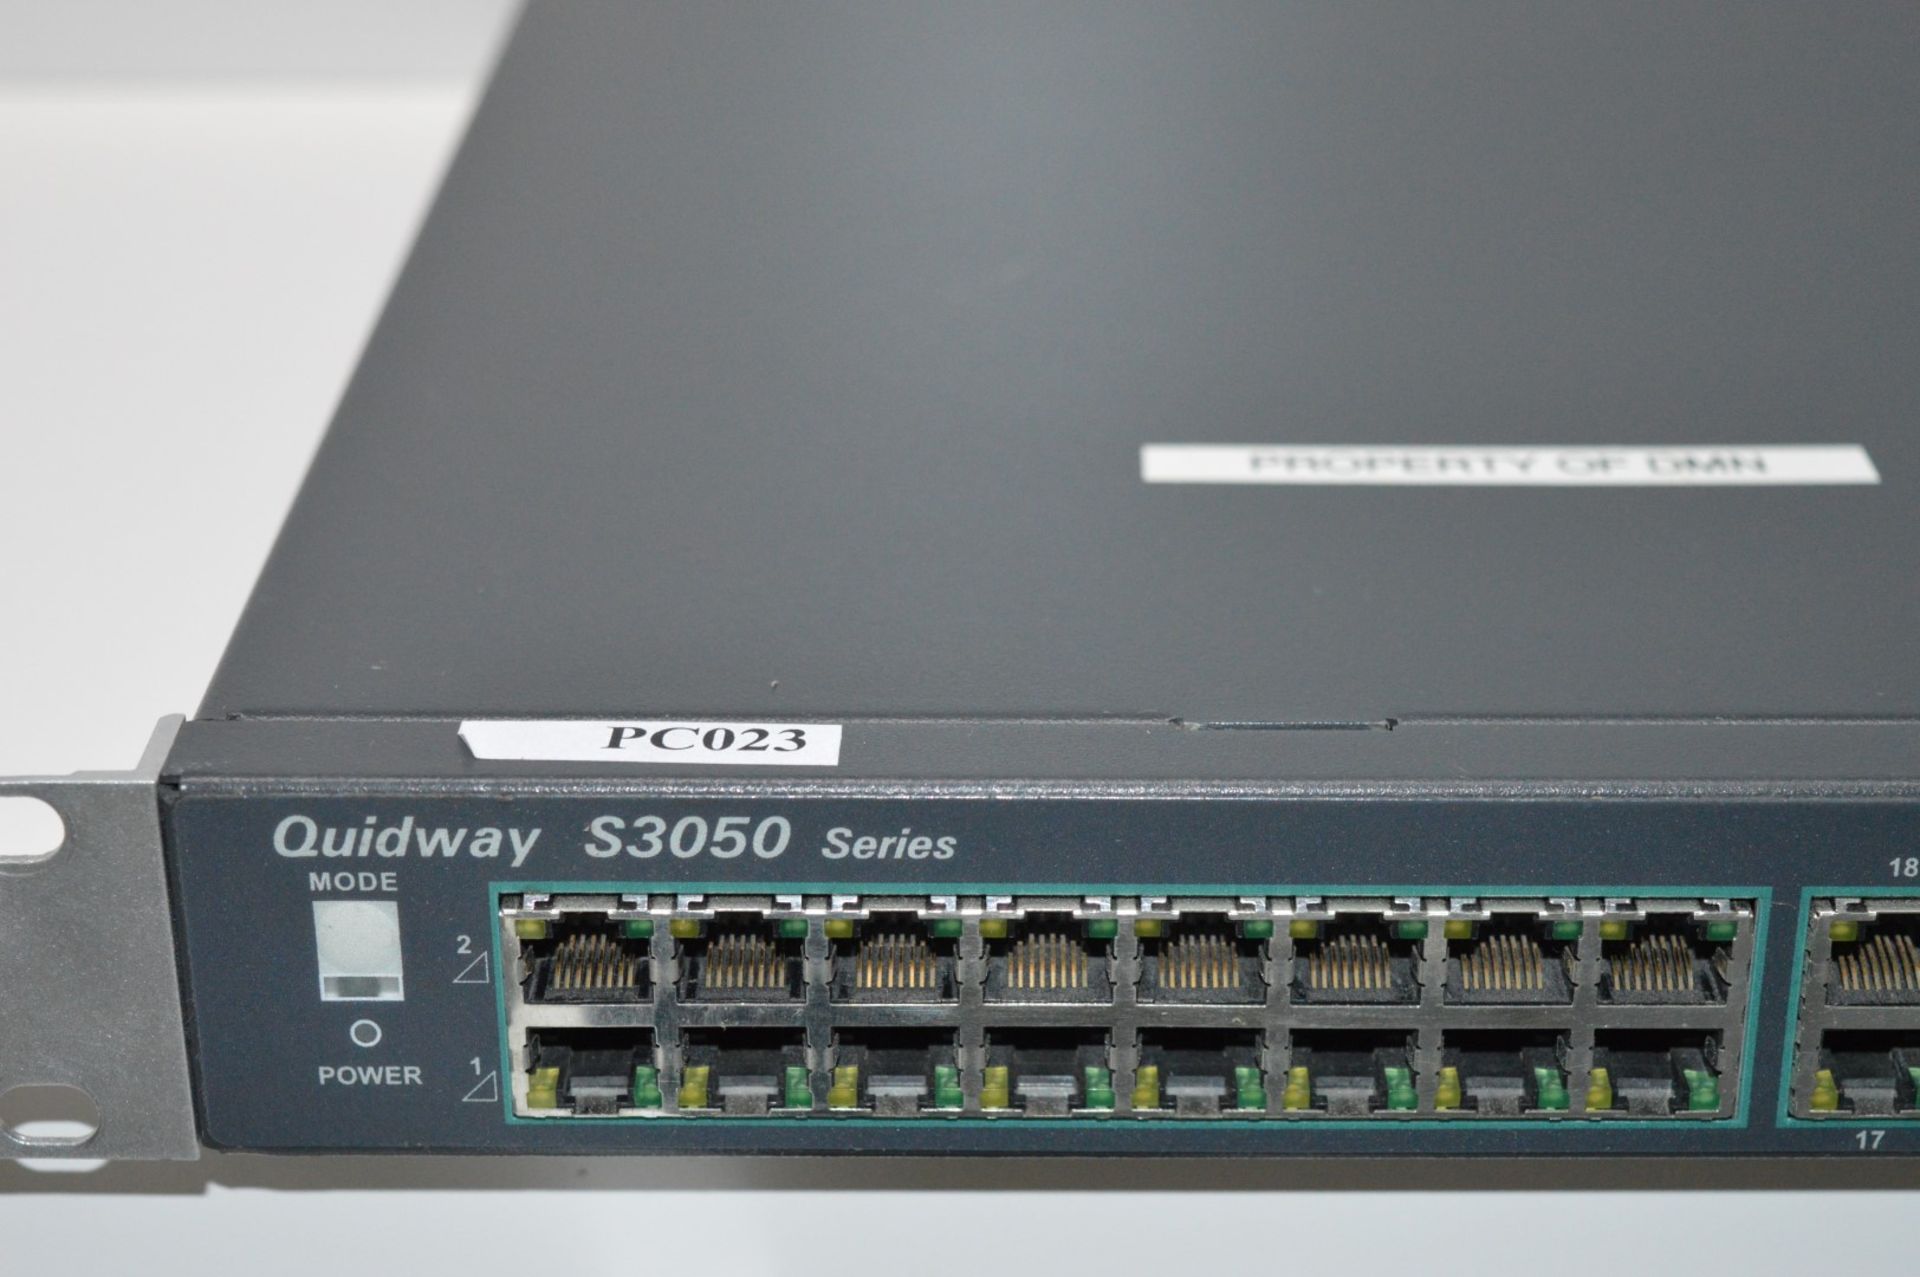 1 x Huawei Quidway S3050 Series Switch - CL300 - Ref PC002 - Location: Altrincham WA14 - Image 4 of 5